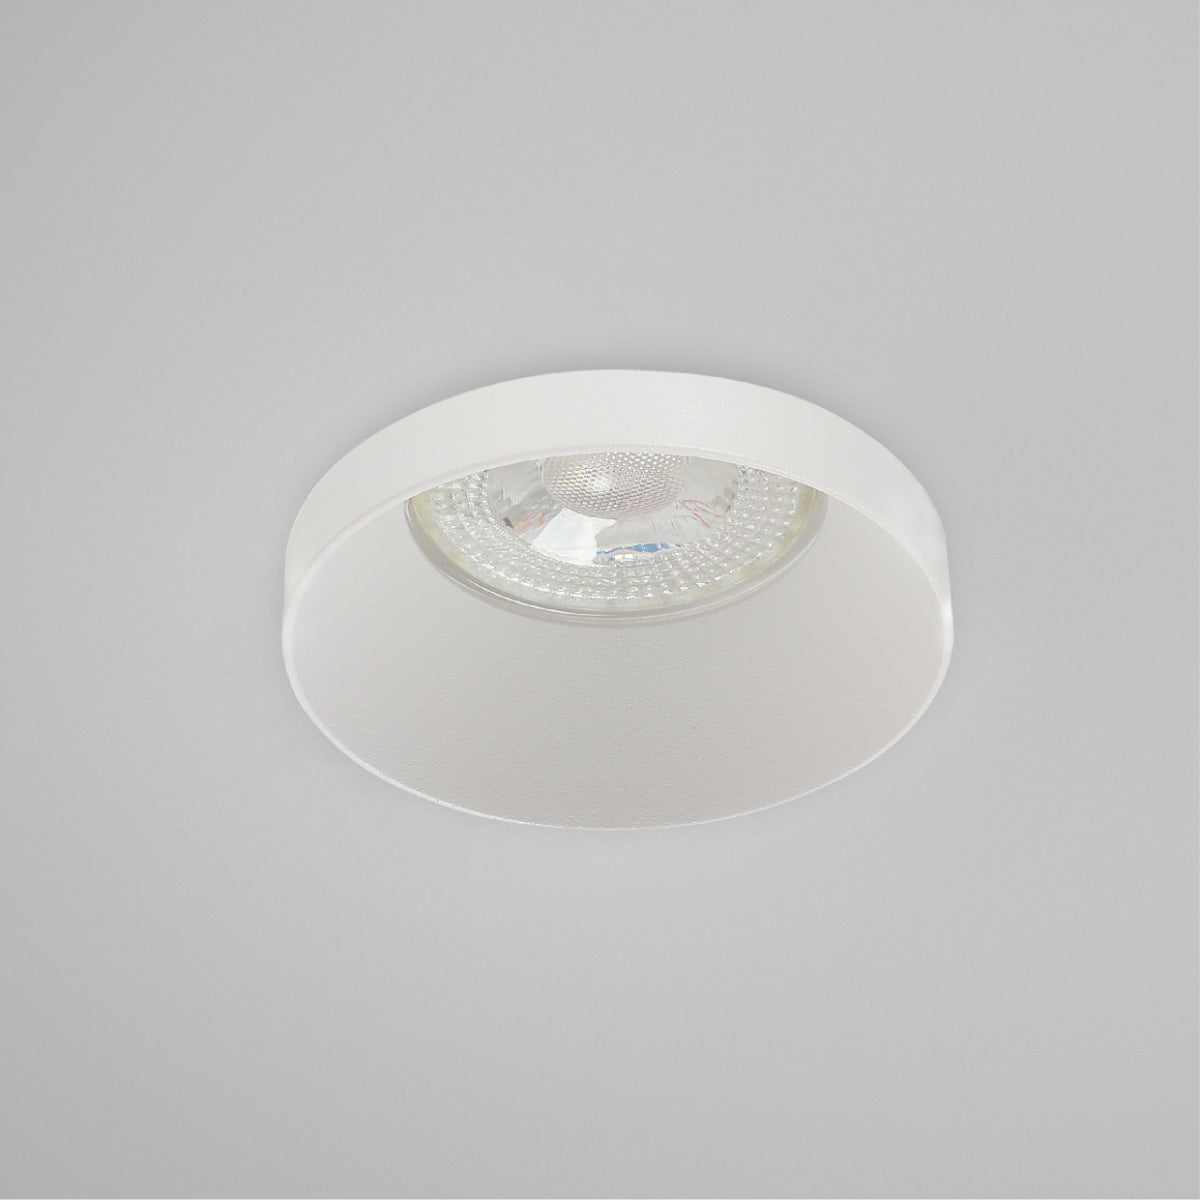 Usage of Modern Recessed GU10 Fixed Downlight with Low UGR Aluminium Design 143-04035